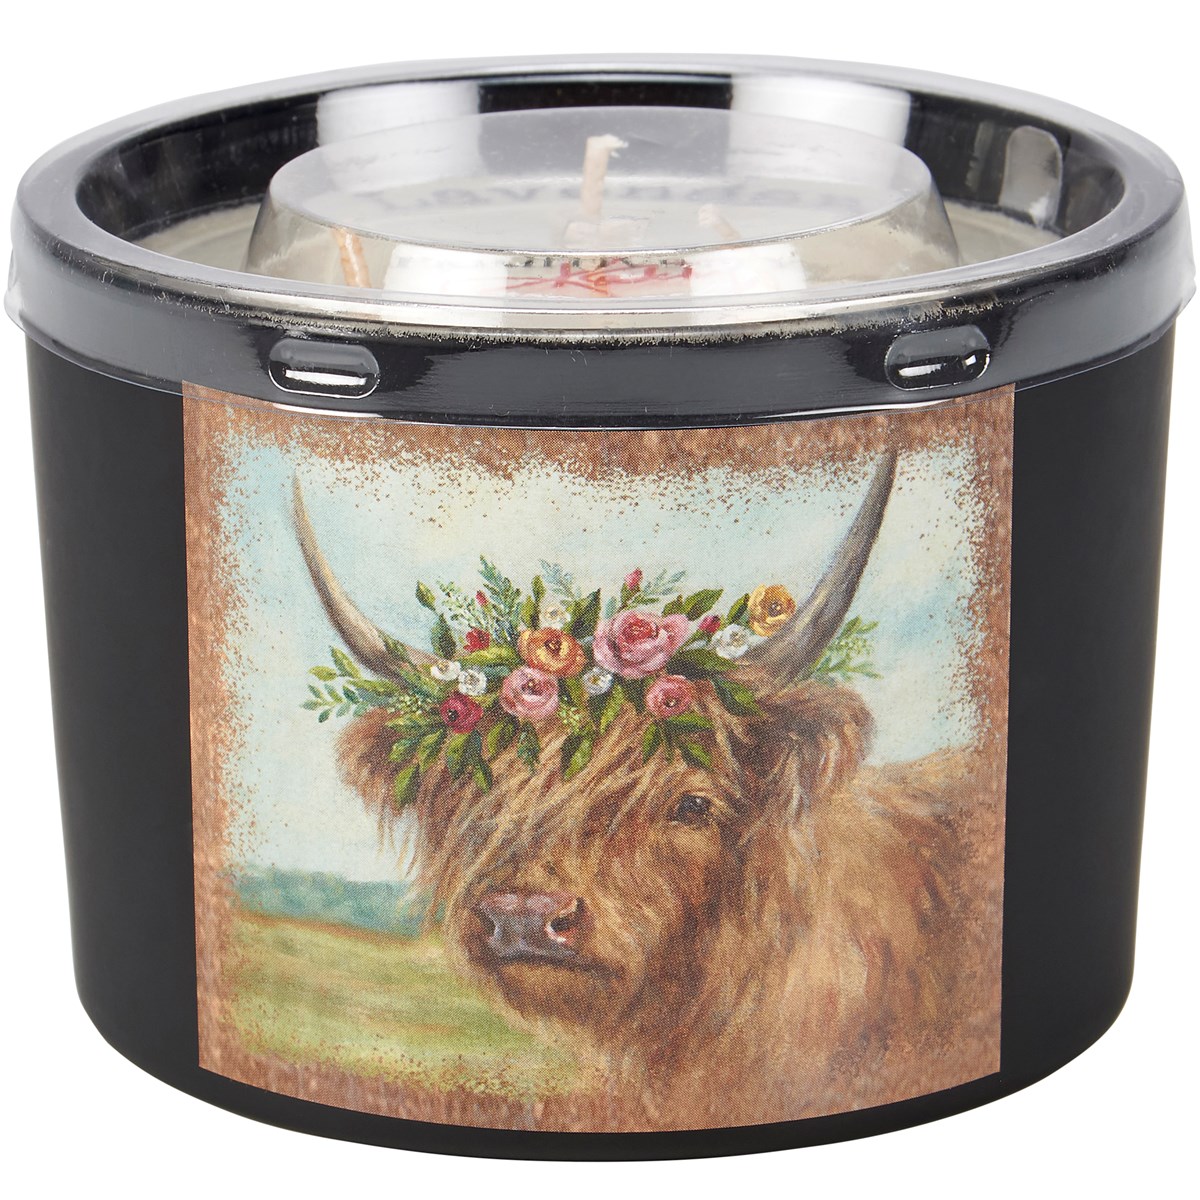 Floral Highland Candle - Soy Wax, Glass, Cotton